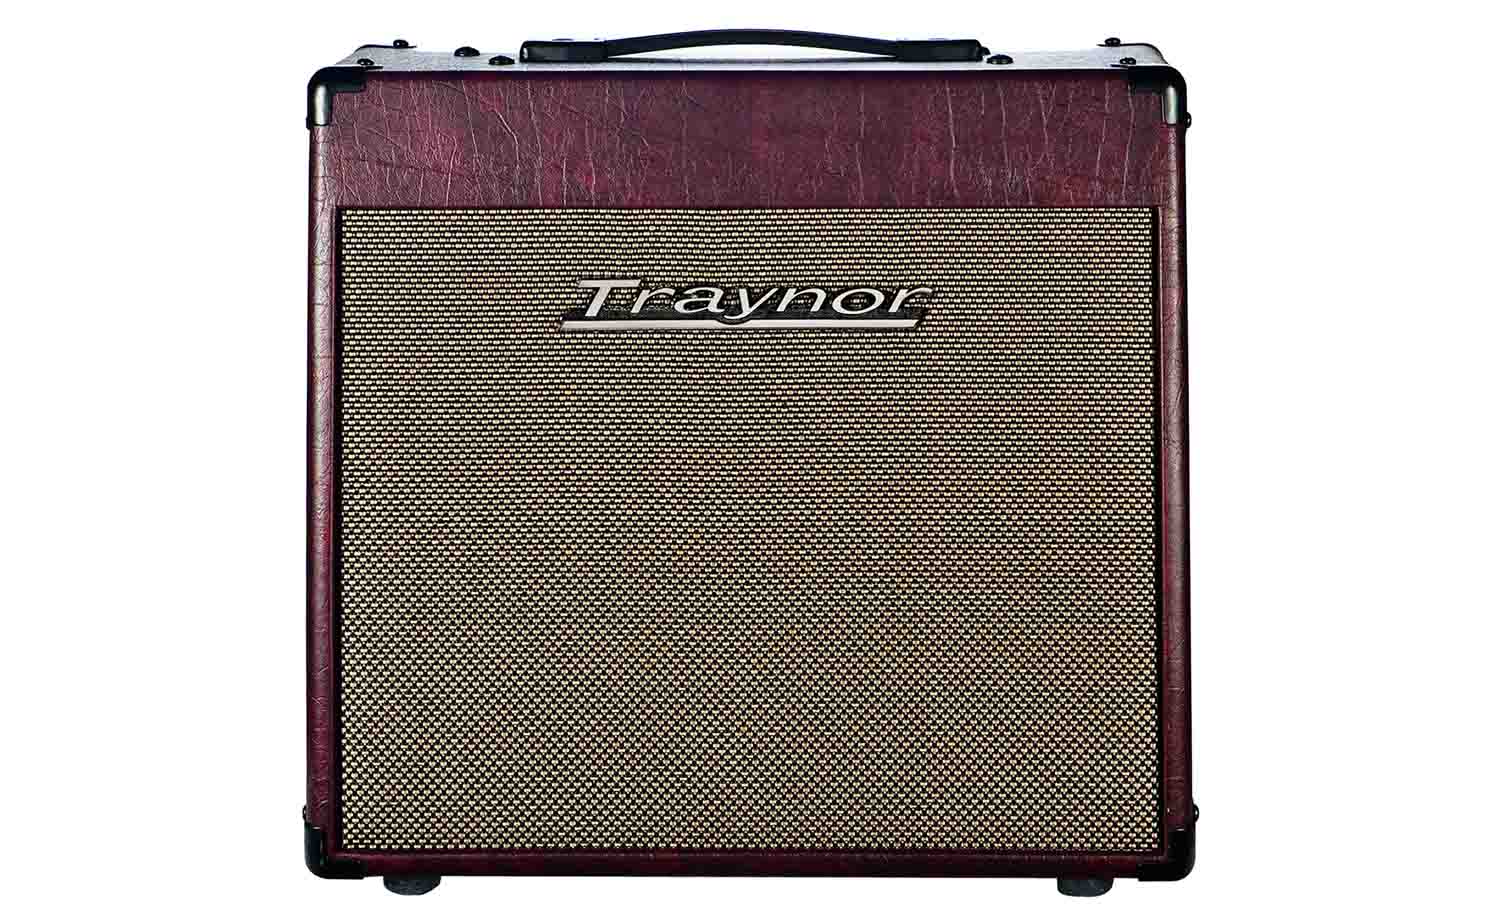 Traynor YCV20WR Guitar Combo Amplifier - Wine Red - Hollywood DJ